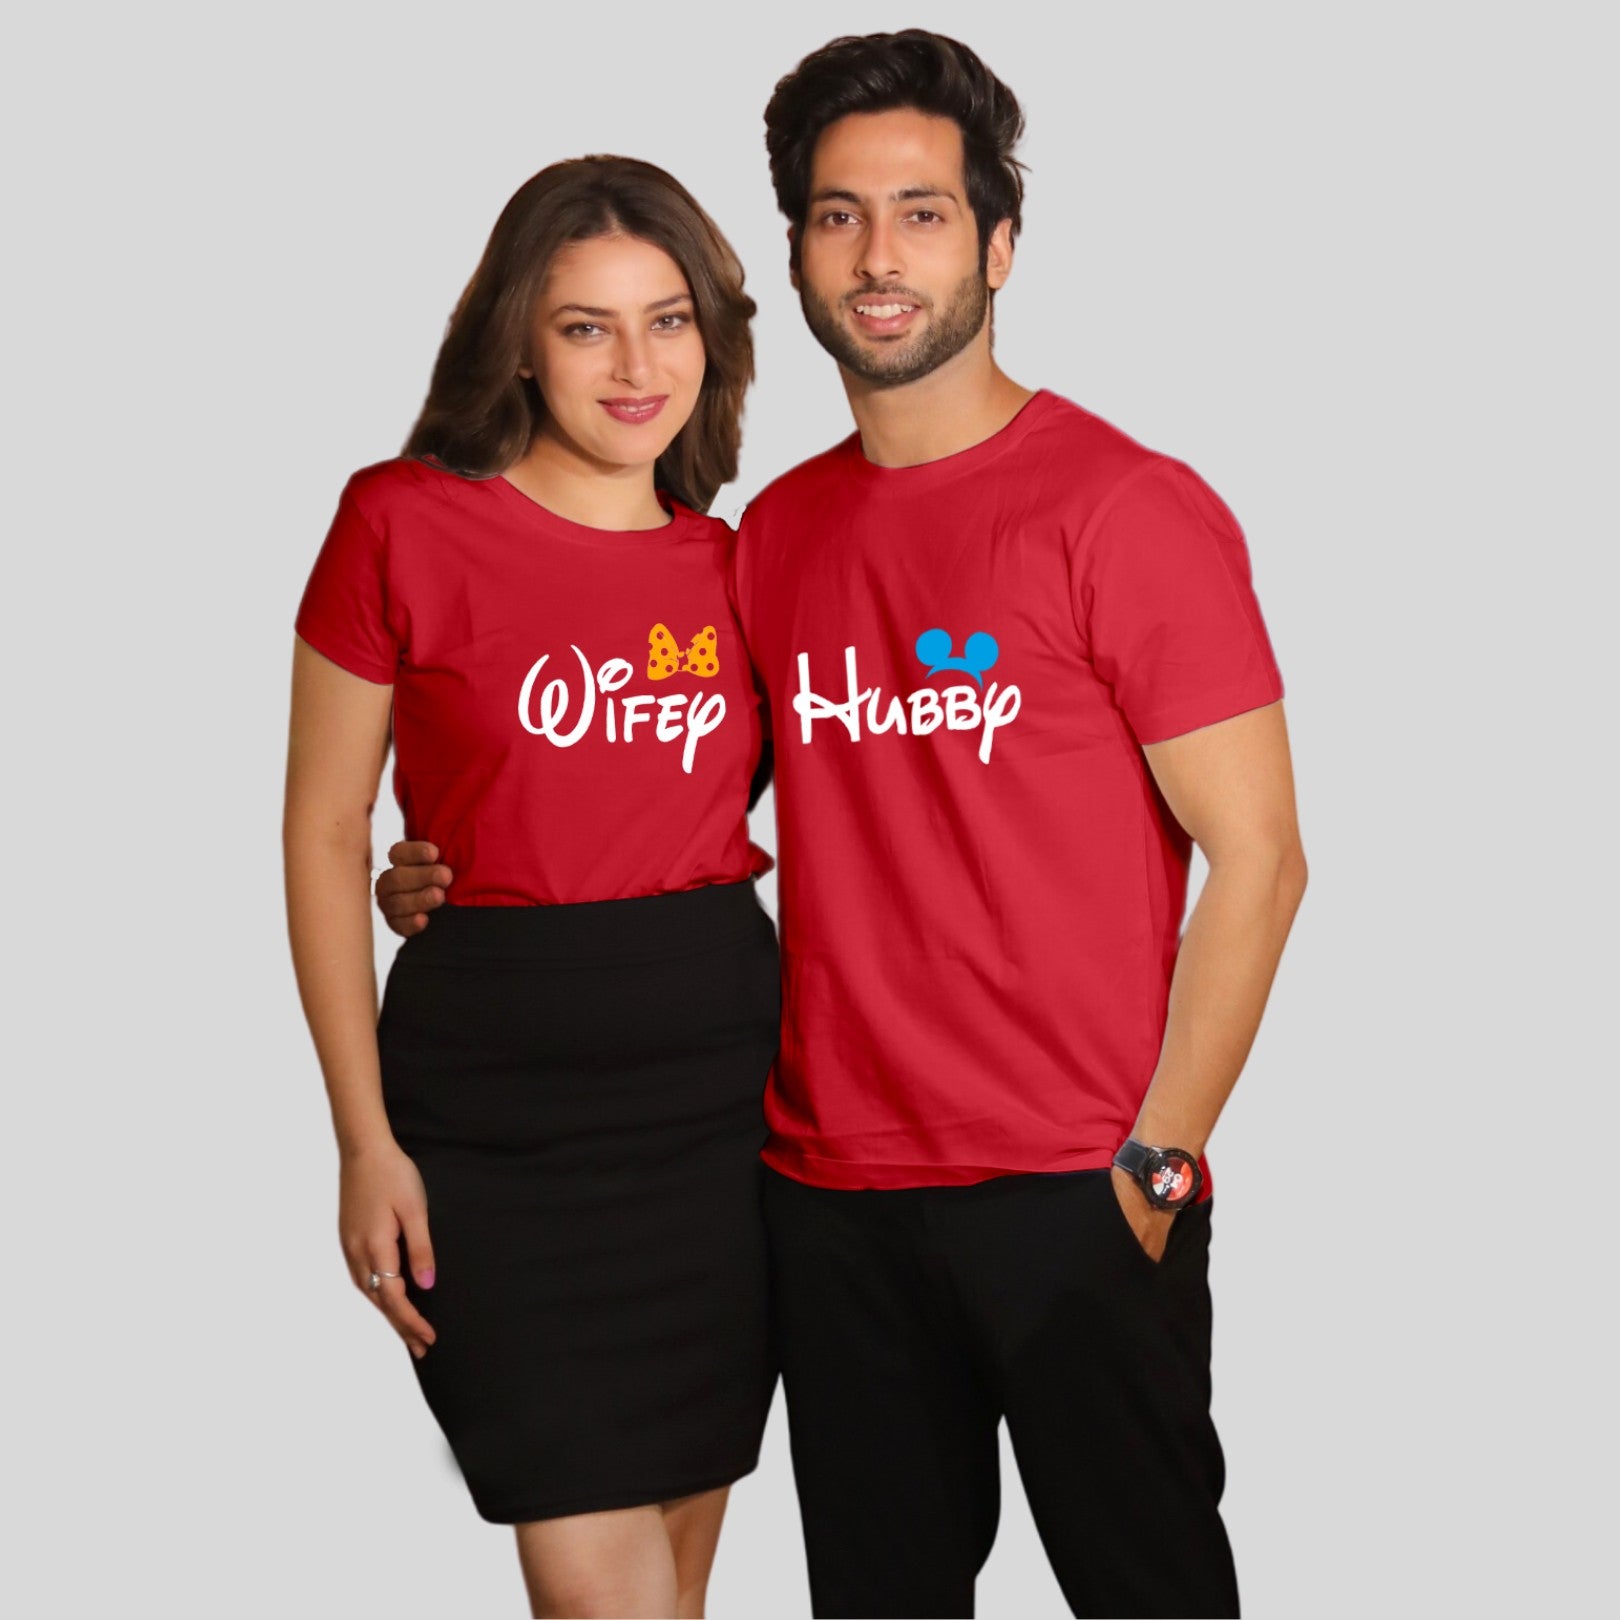 Couple T Shirt For Husband Wife In Red Colour - Hubby Wifey Variant